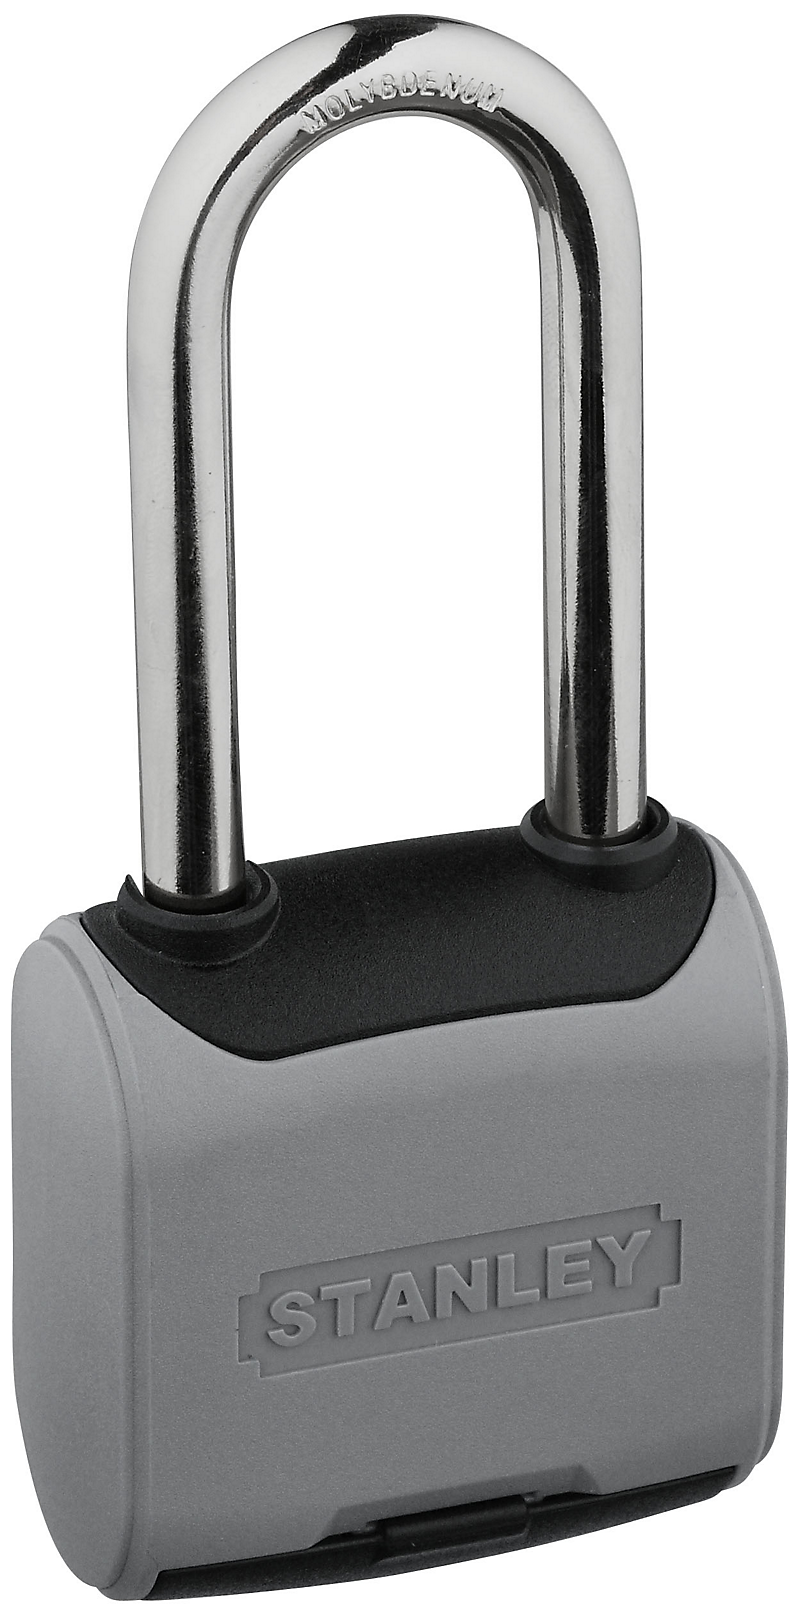 Primary Product Image for Combination Security Padlock